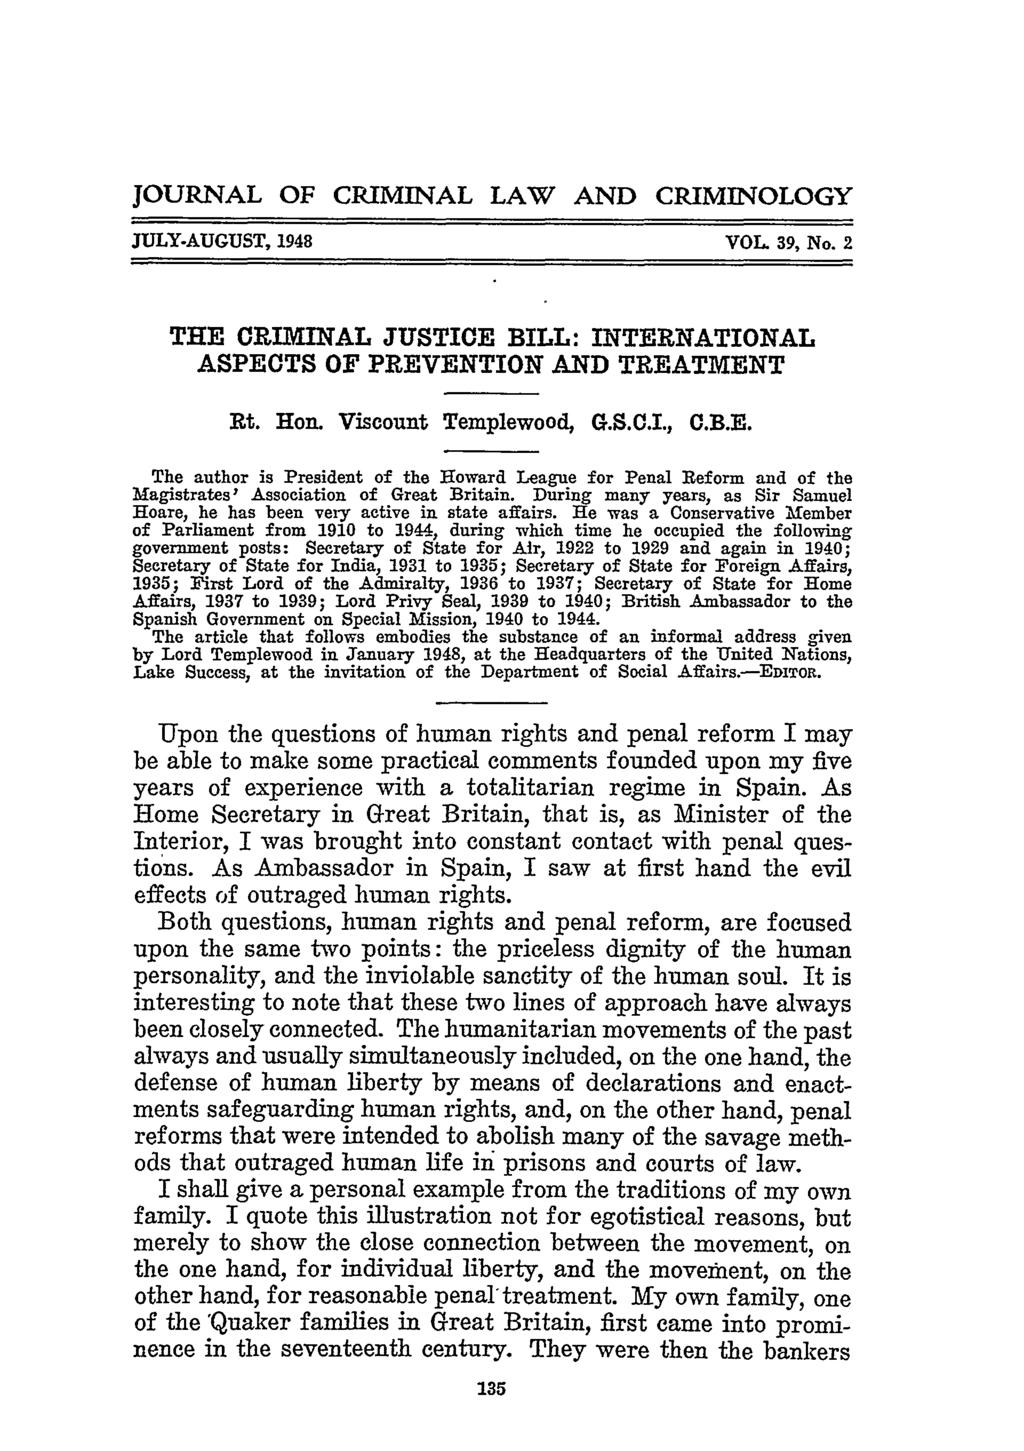 JOURNAL OF CRIMINAL LAW AND CRIMINOLOGY JULY-AUGUST, 1948 VOL 39, No. 2 THE CRIMINAL JUSTICE BILL: INTERNATIONAL ASPECTS OF PREVENTION AND TREATMENT Rt. Hon. Viscount Templewood, G.S.C.I., C.B.E. The author is President of the Howard League for Penal Reform and of the Magistrates' Association of Great Britain.